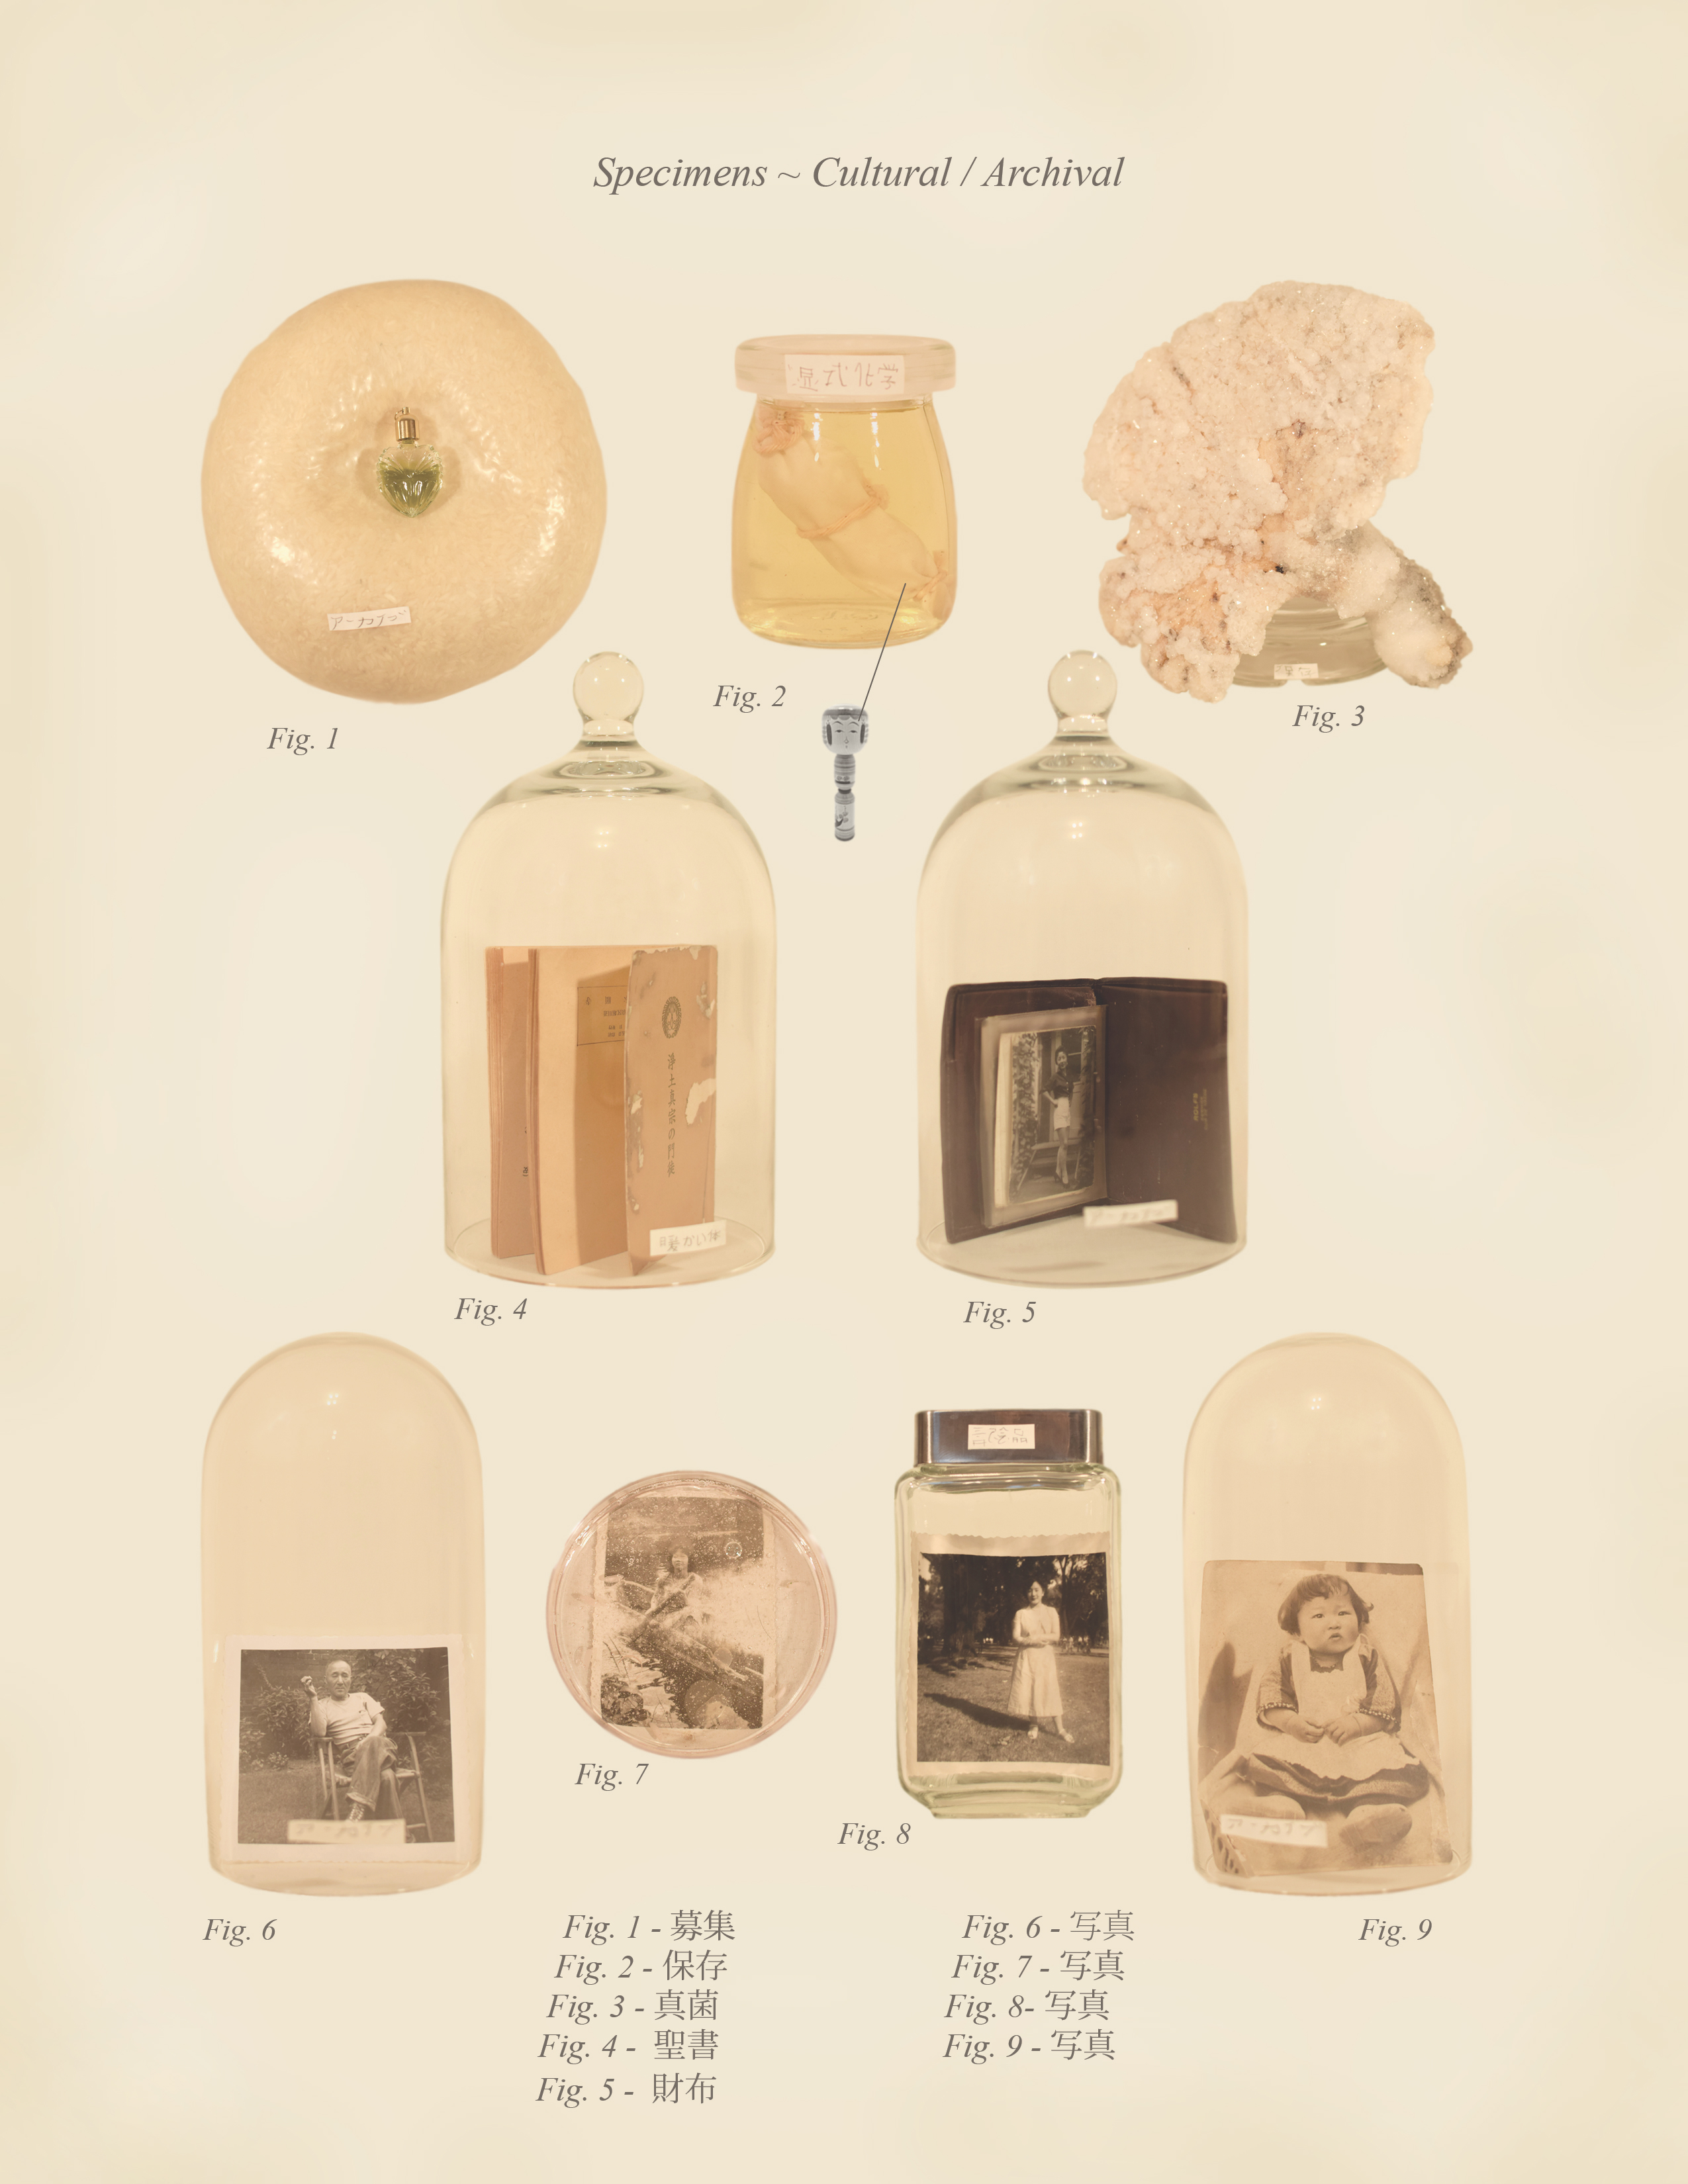 Specimens ~ Cultural / Archival